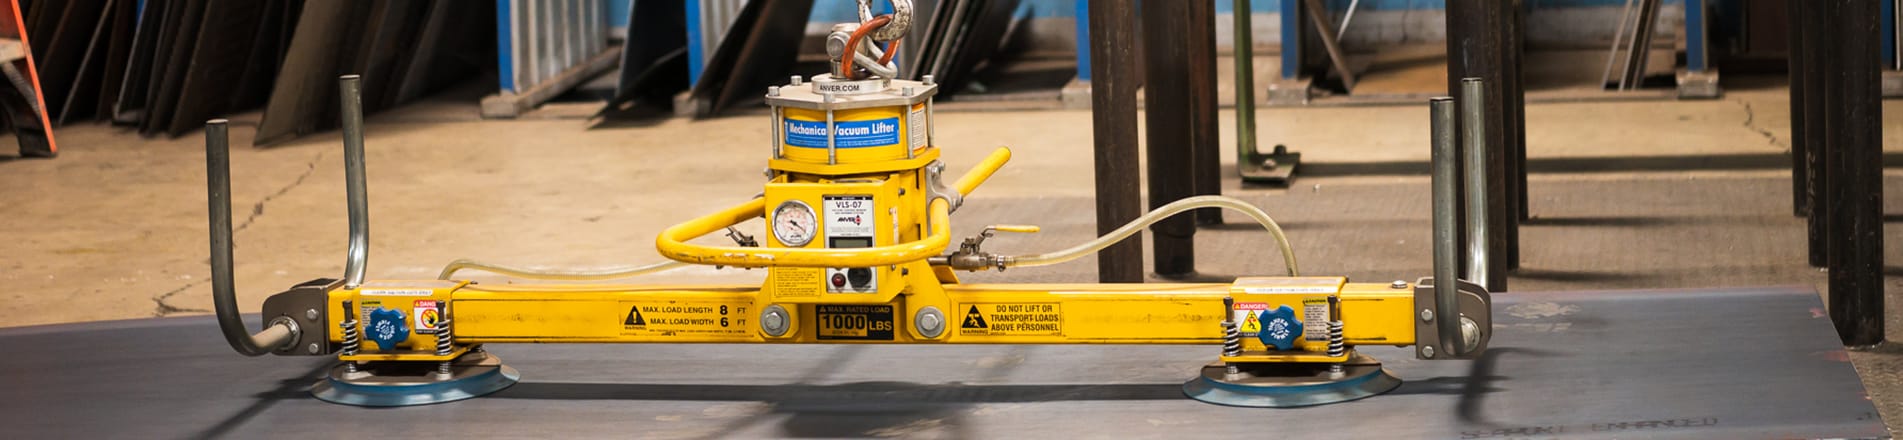 An industrial lifter for steel and metal work sits on a piece of metal.